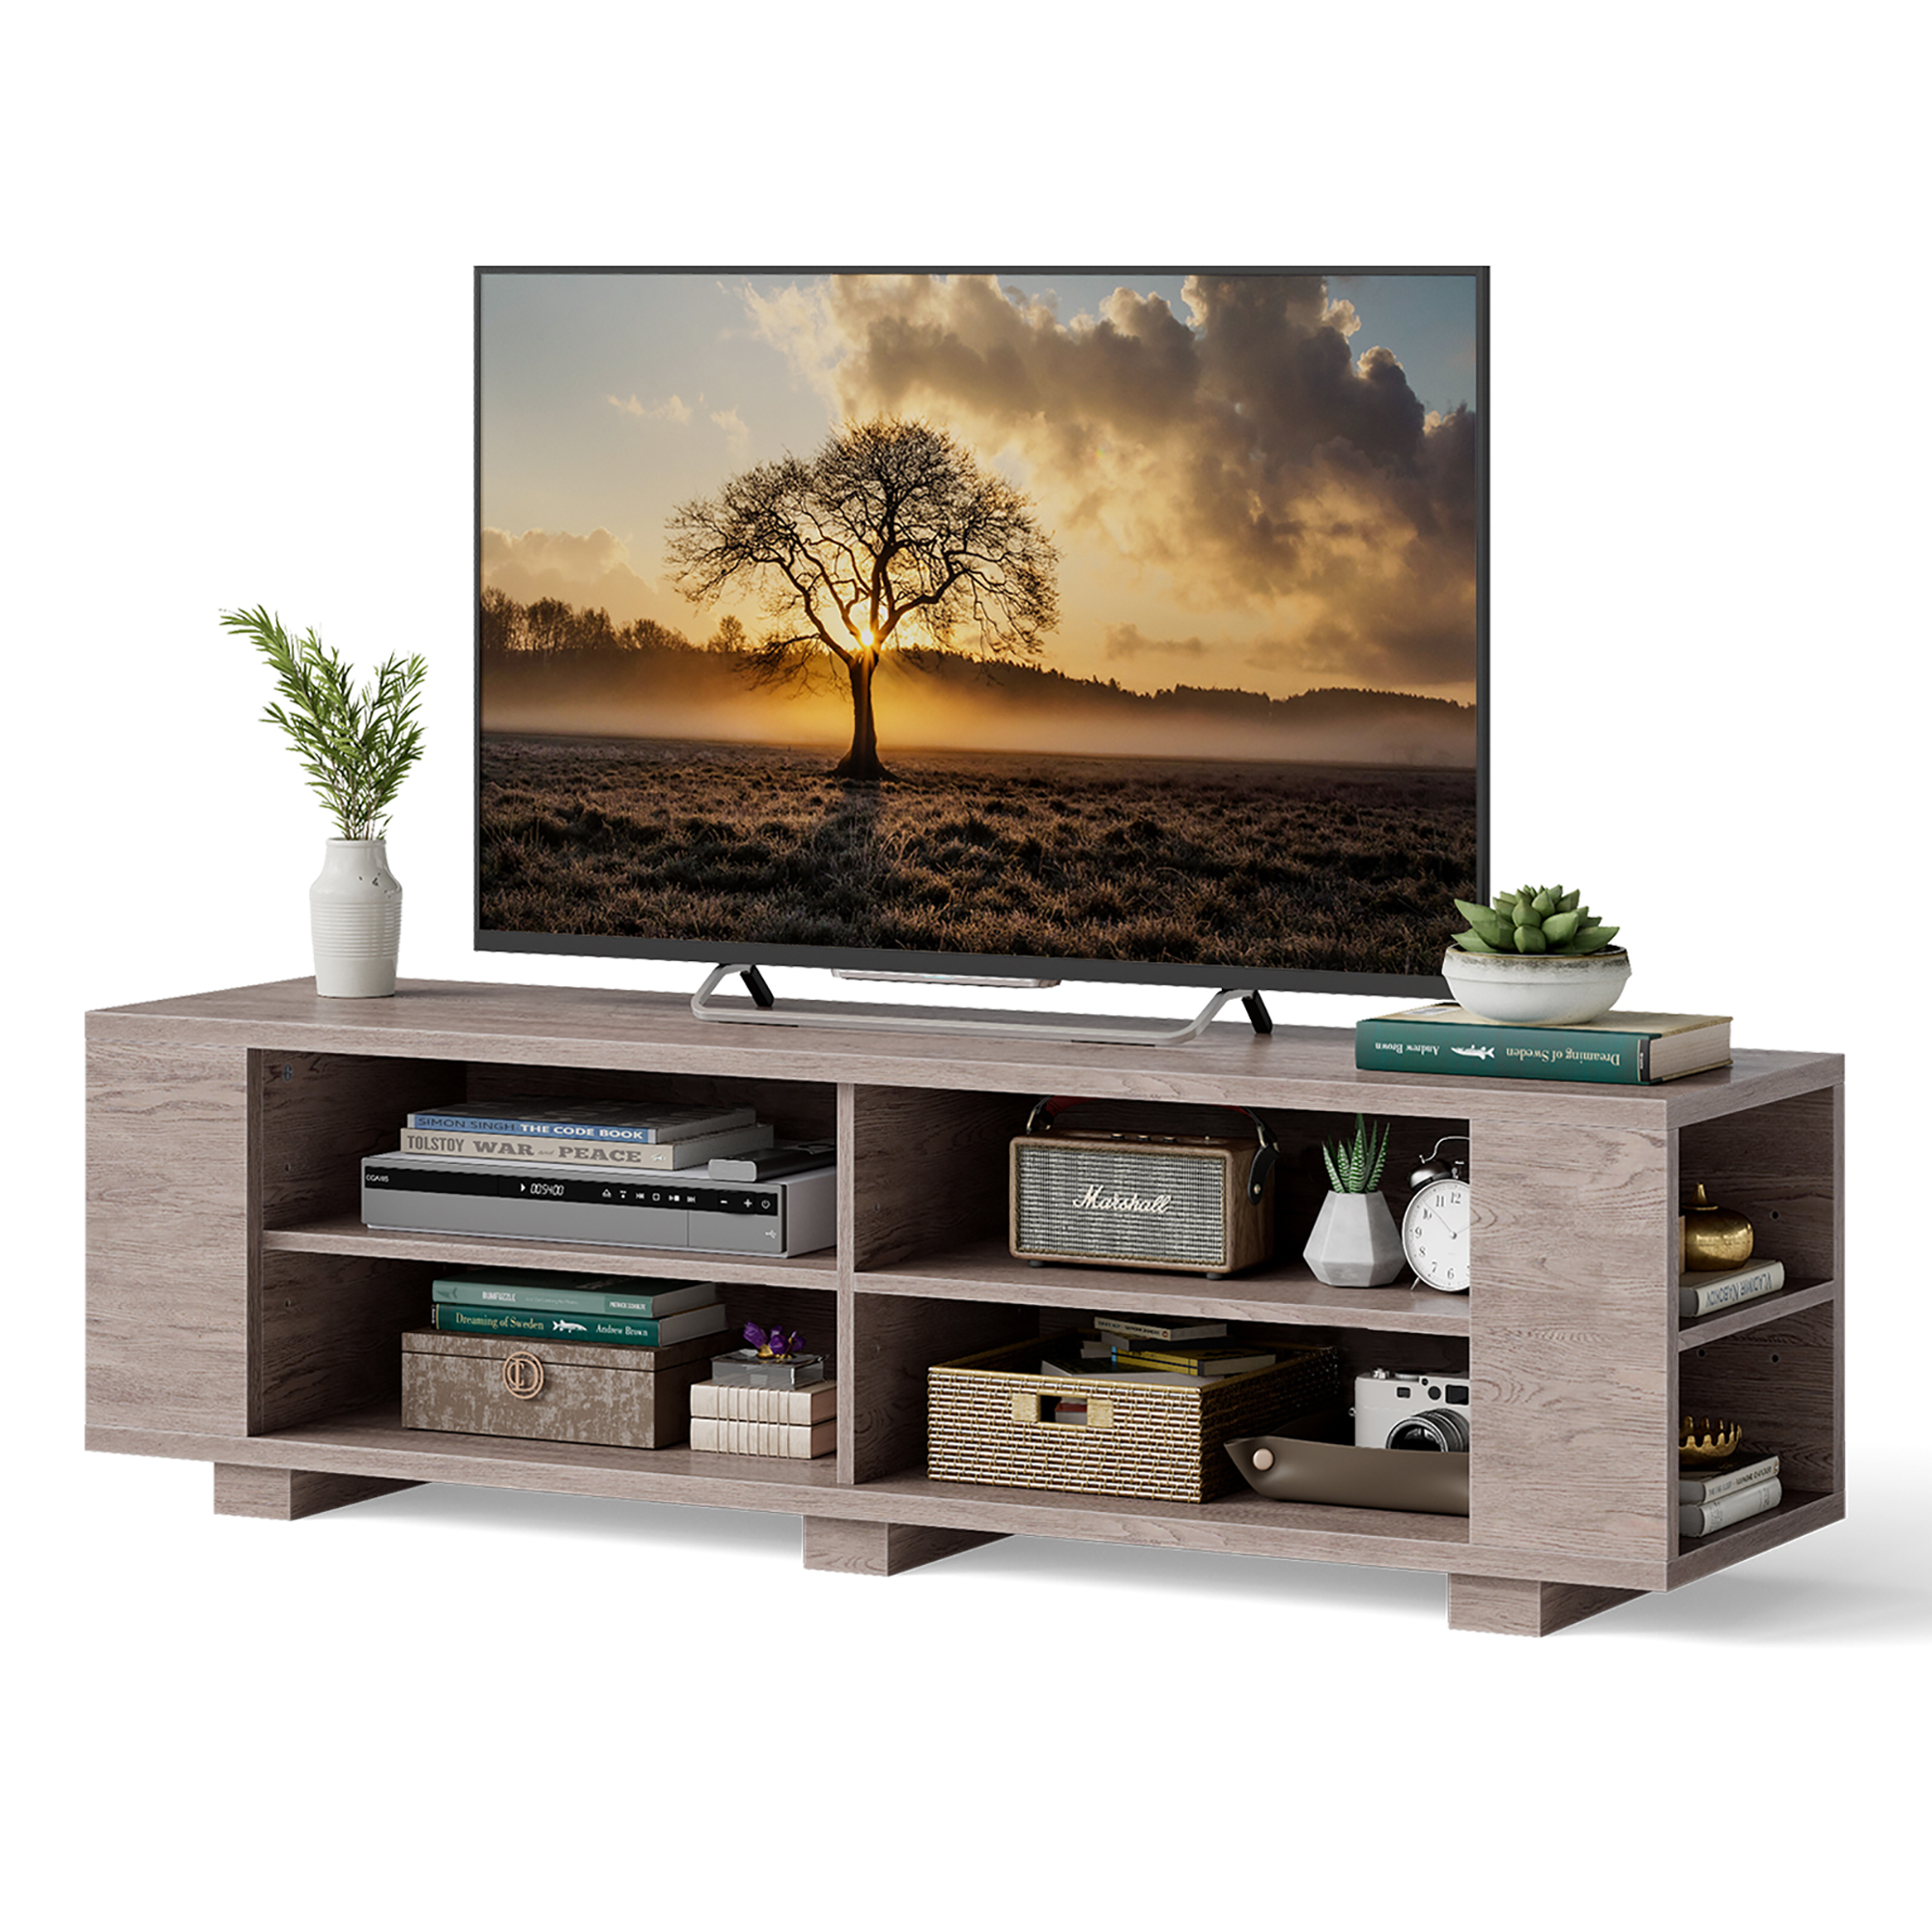 Costway 59'' Wood TV Stand Console Storage Entertainment Media Center with Shelf Grey - image 1 of 9